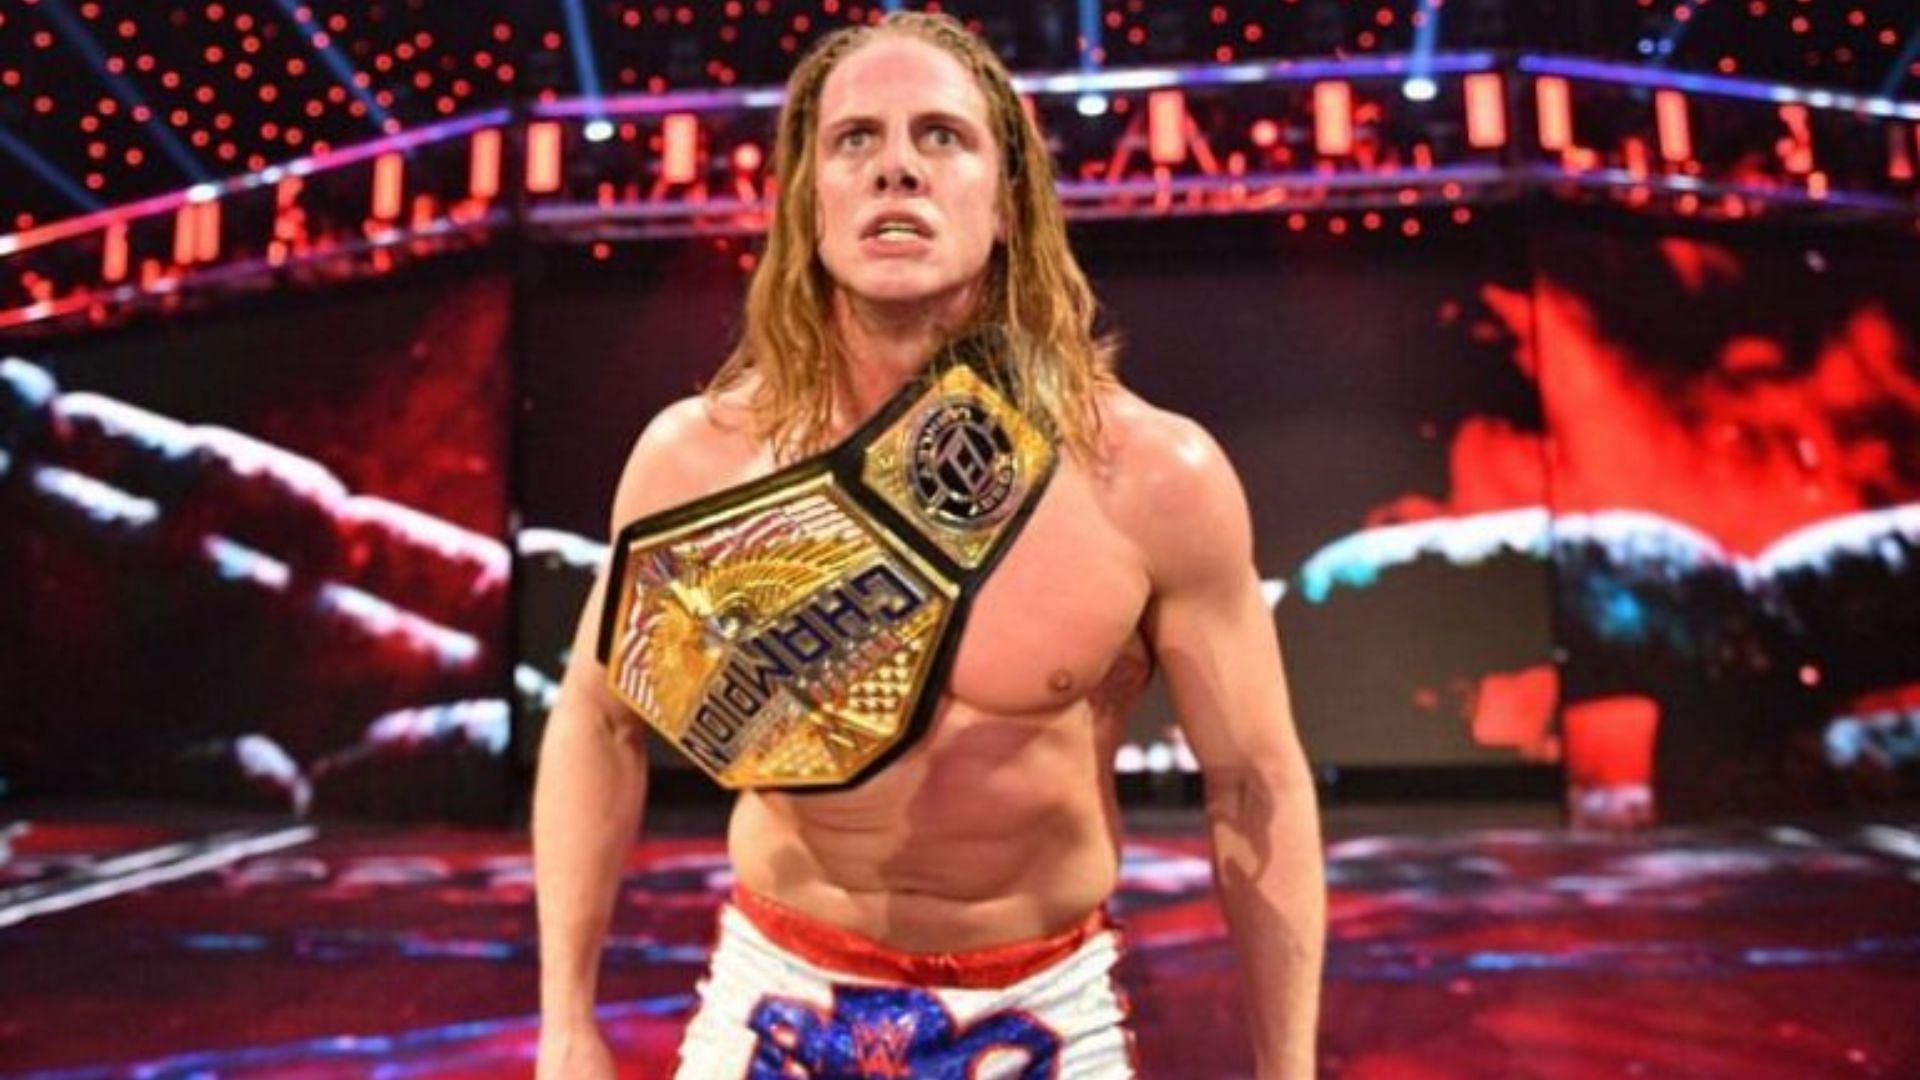 Matt Riddle was recently victorious over Seth Rollins at Extreme Rules